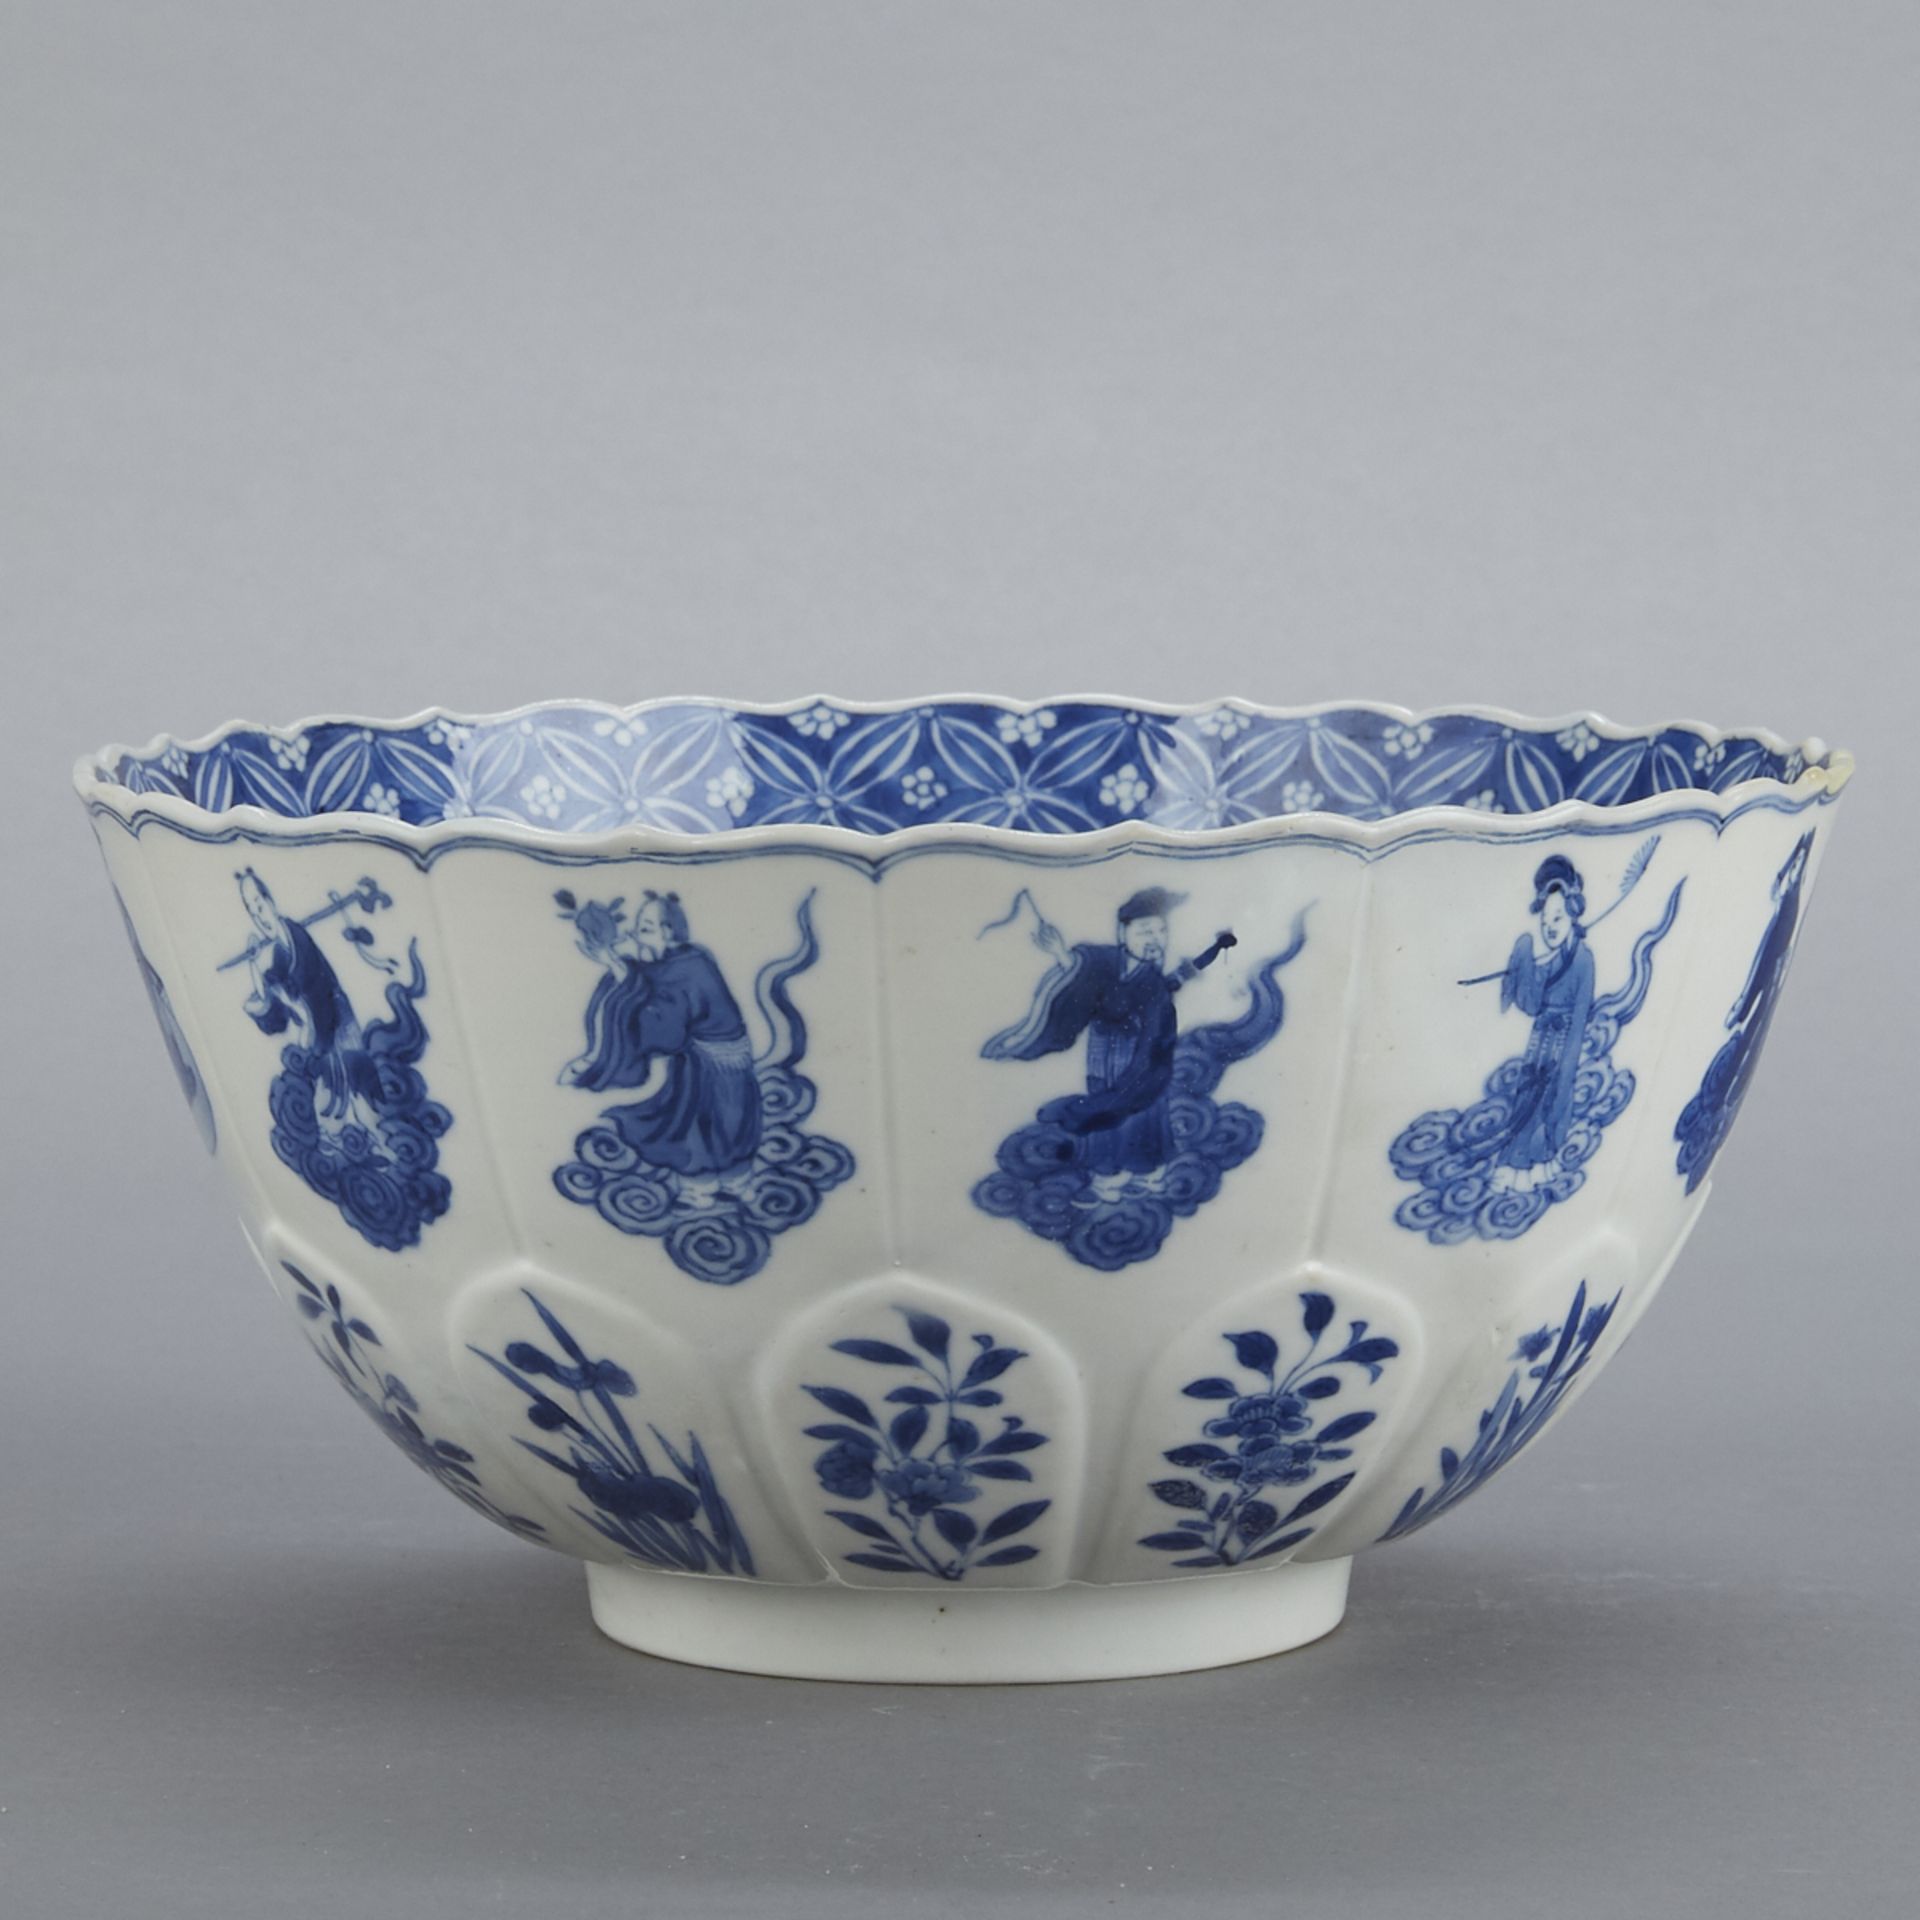 Chinese Xianfeng Blue & White Porcelain Bowl - Mark Period - Image 4 of 7